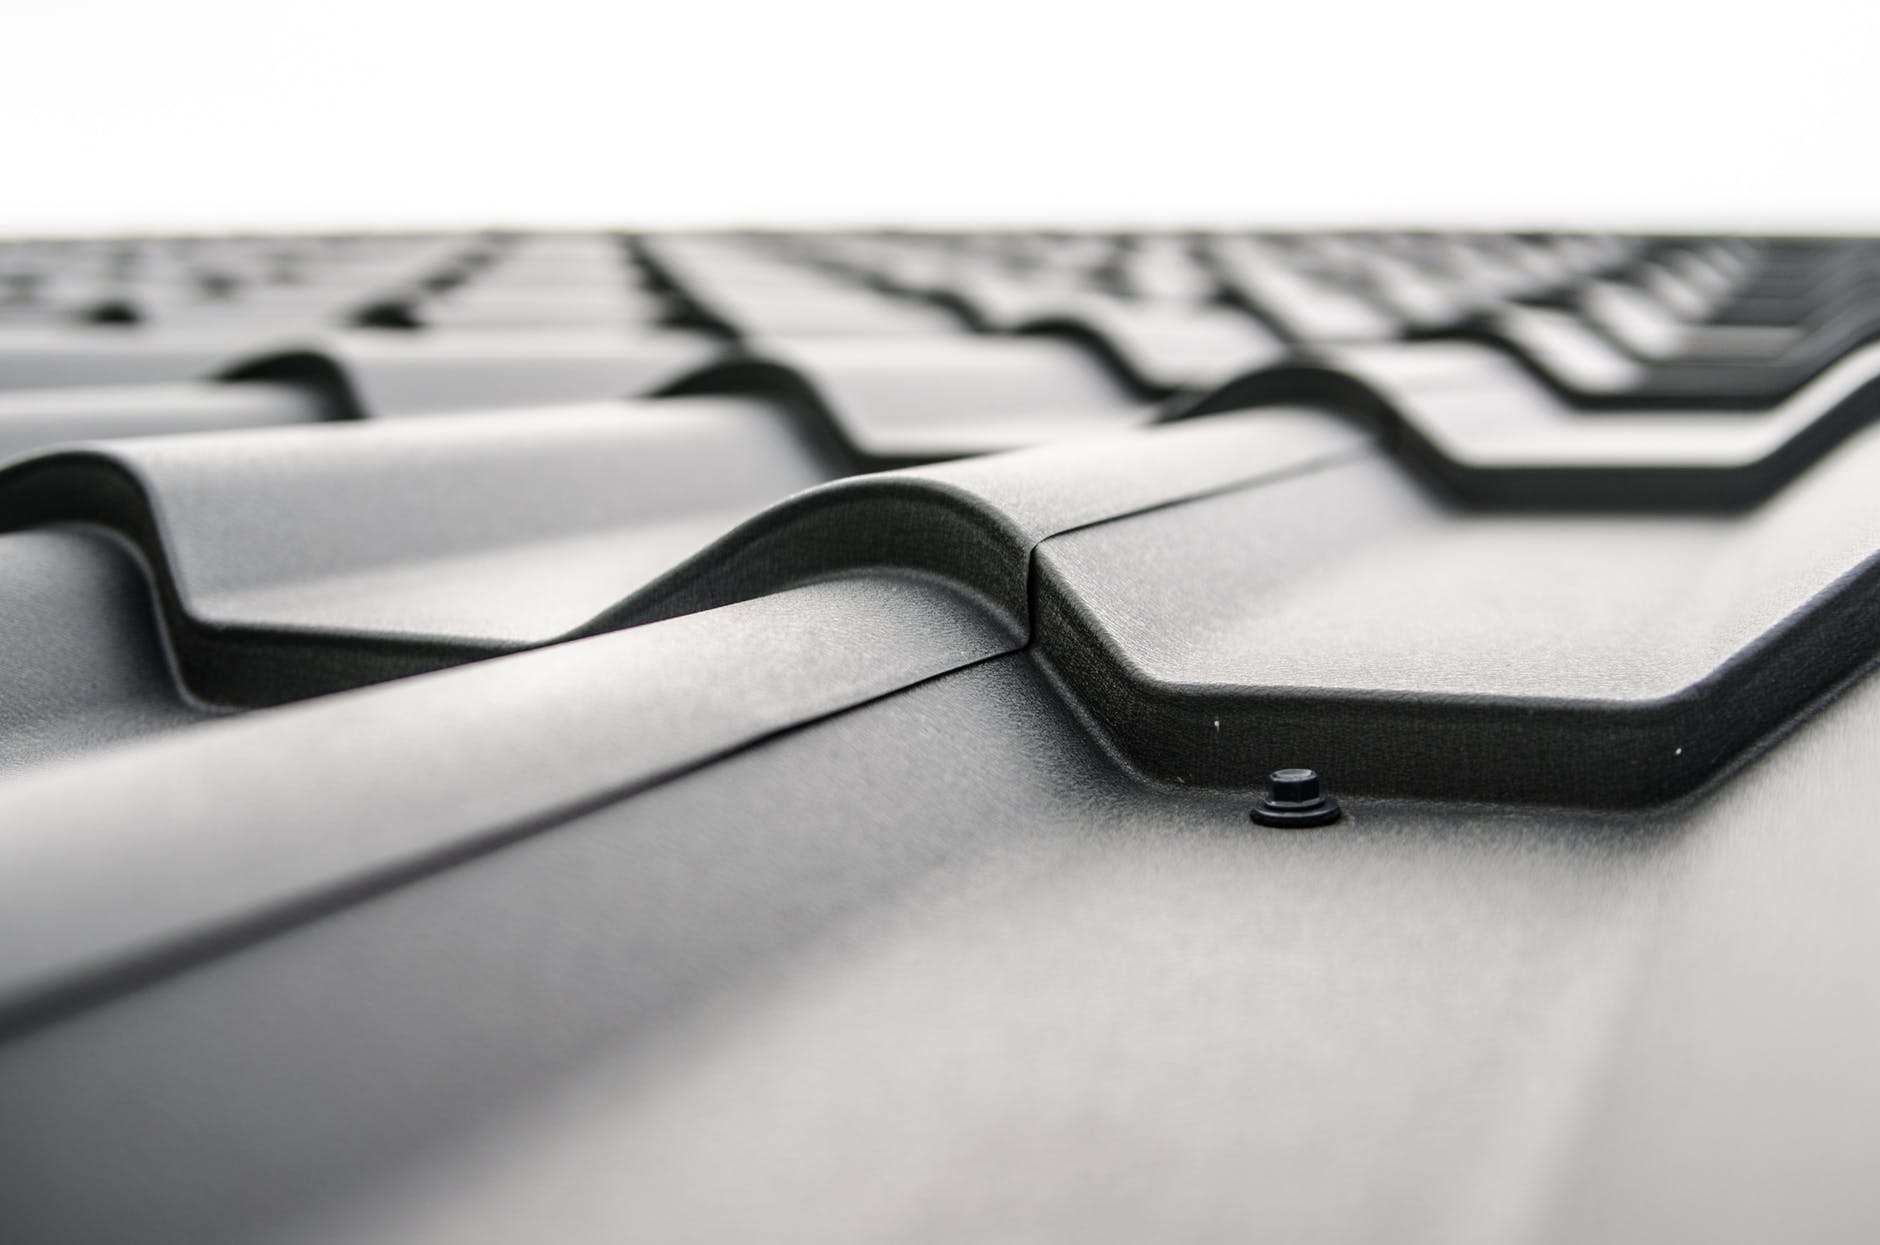 5 FACTORS TO CONSIDER BEFORE SELECTING YOUR ROOFING MATERIAL